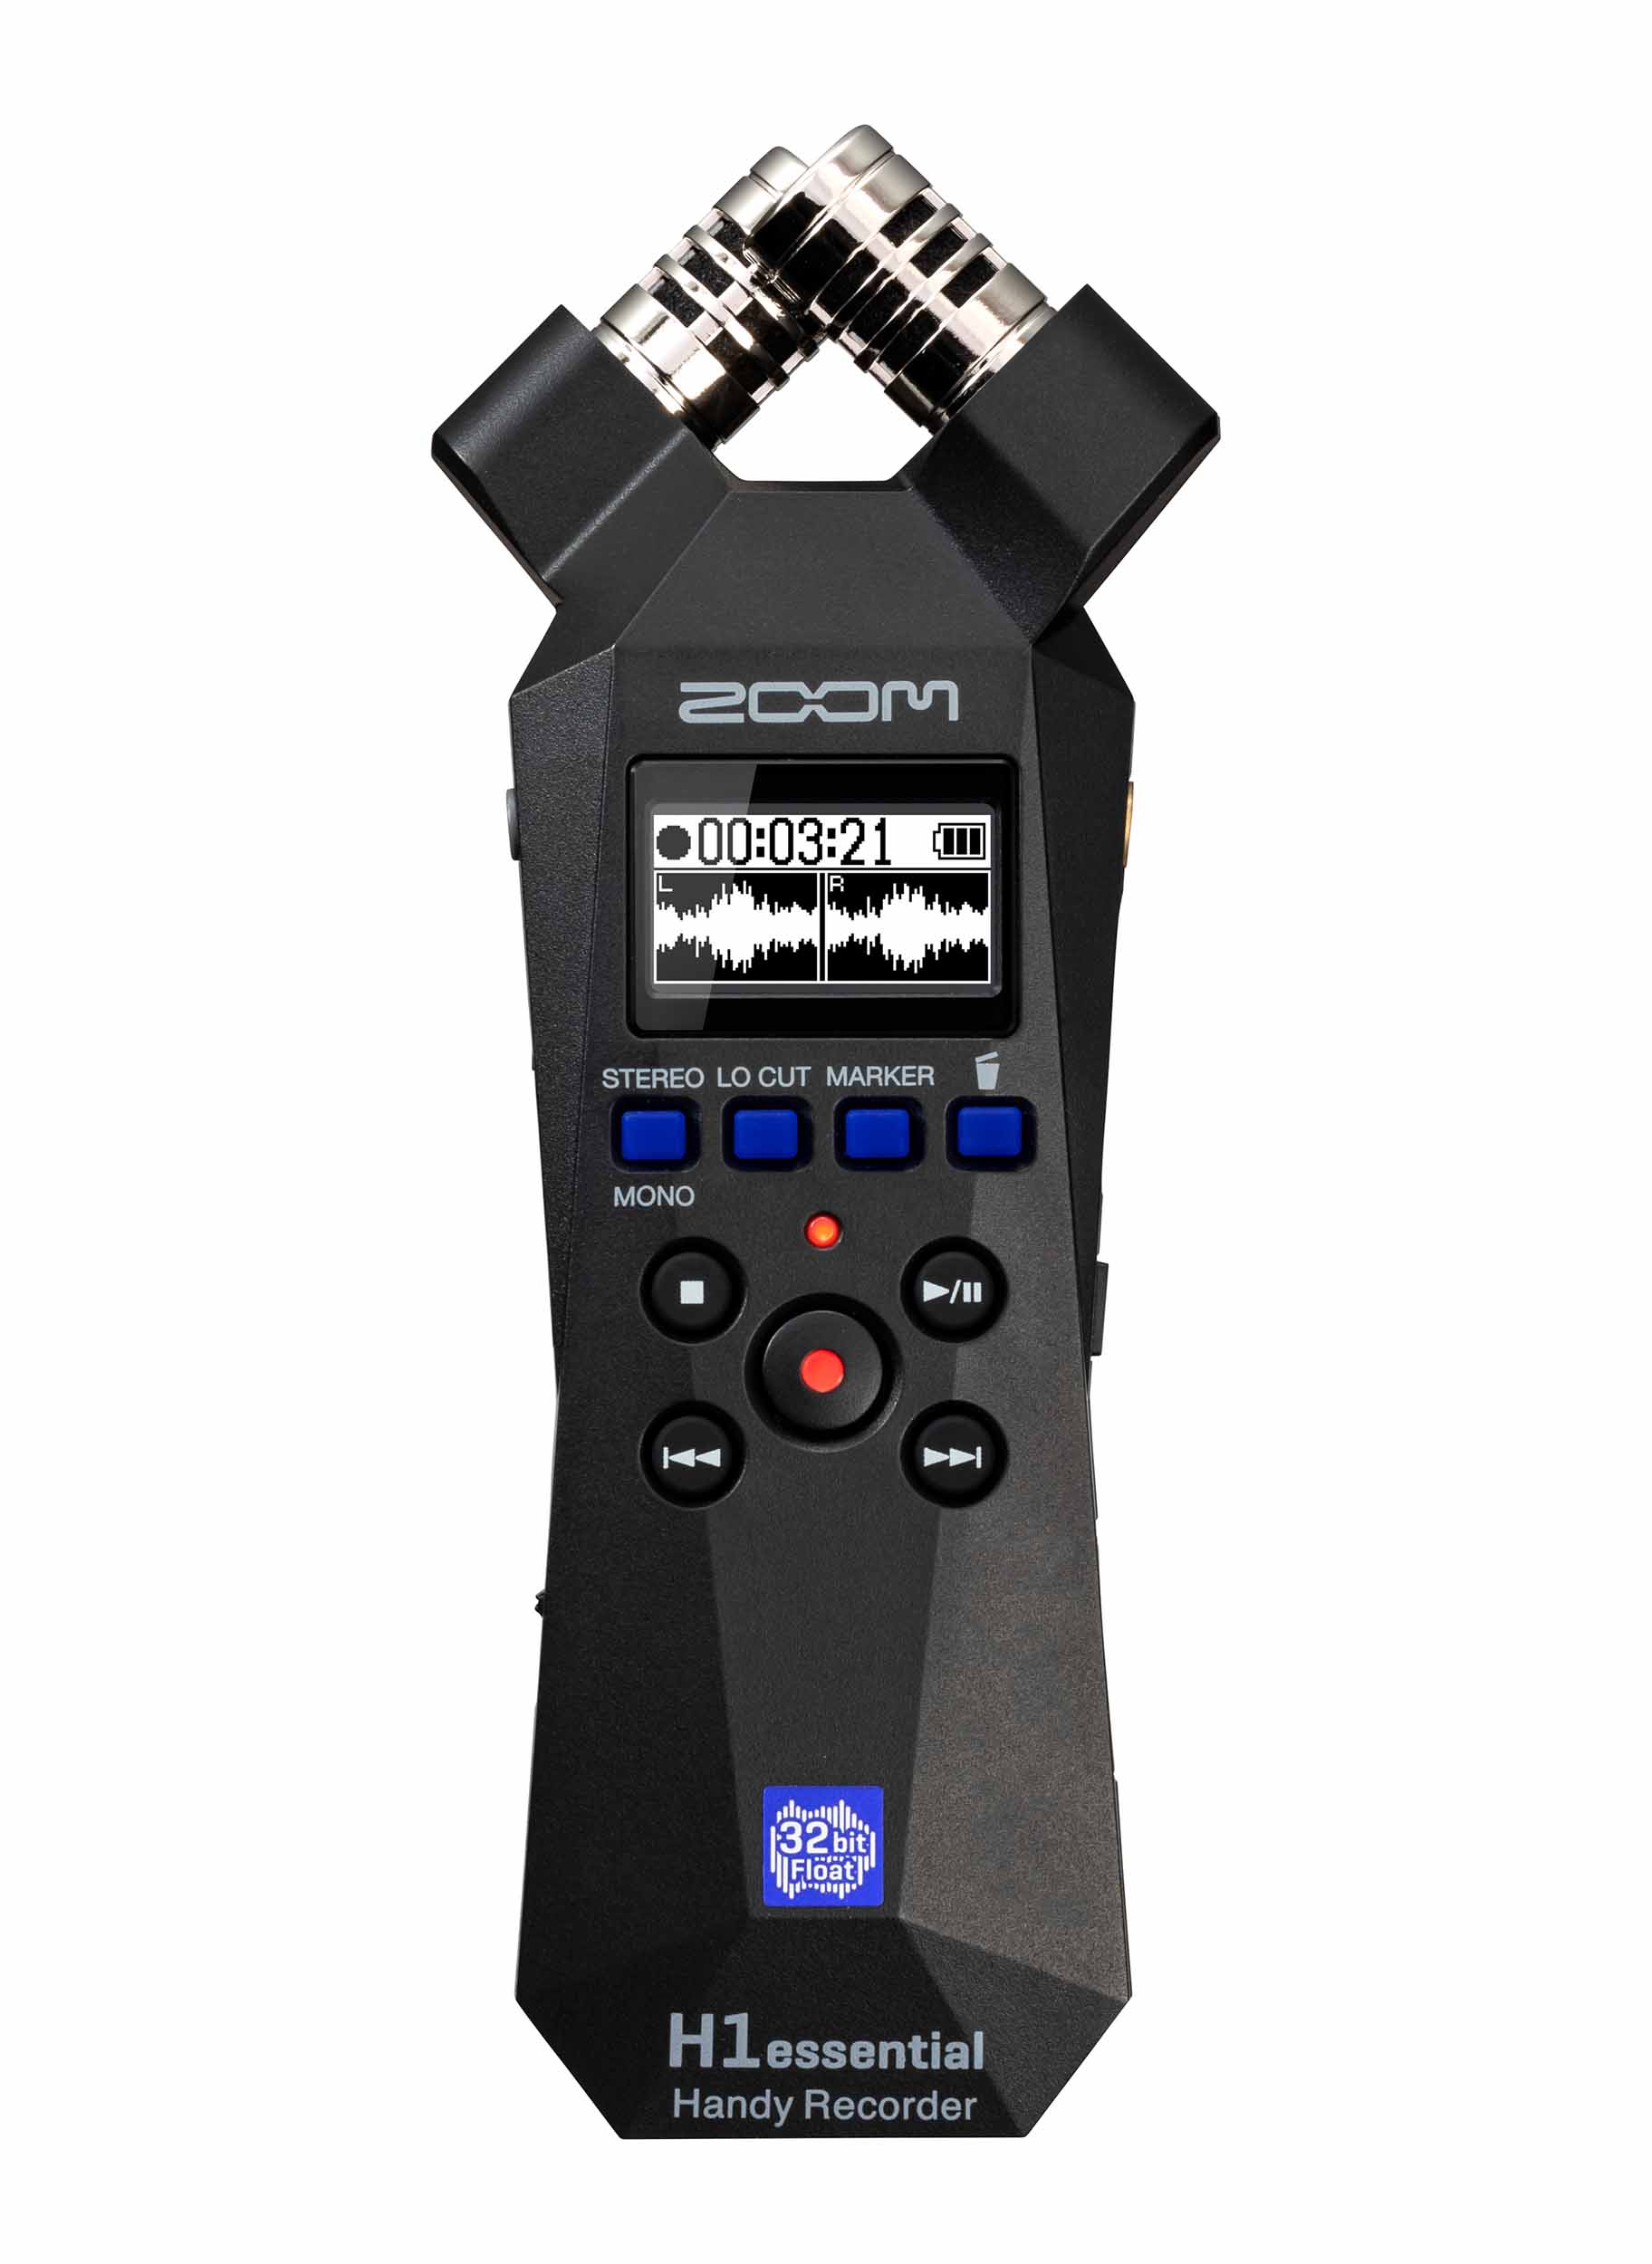 Do not post until 25 January : Zoom H1essential 32-Bit Float Handy Portable Digital Recorder Zoom